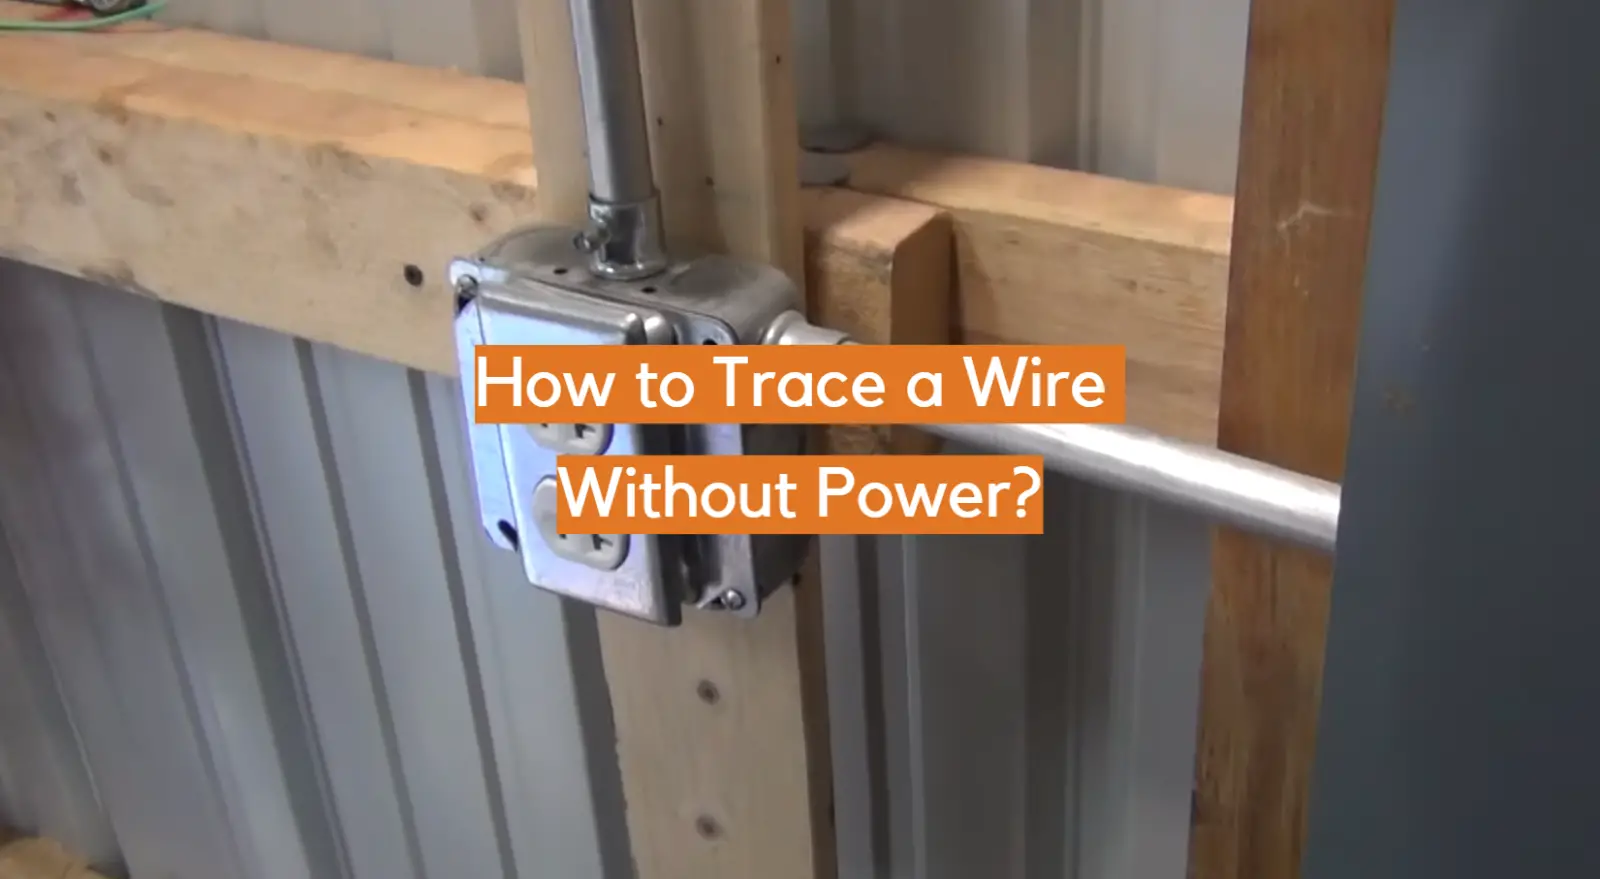 How to Trace a Wire Without Power?